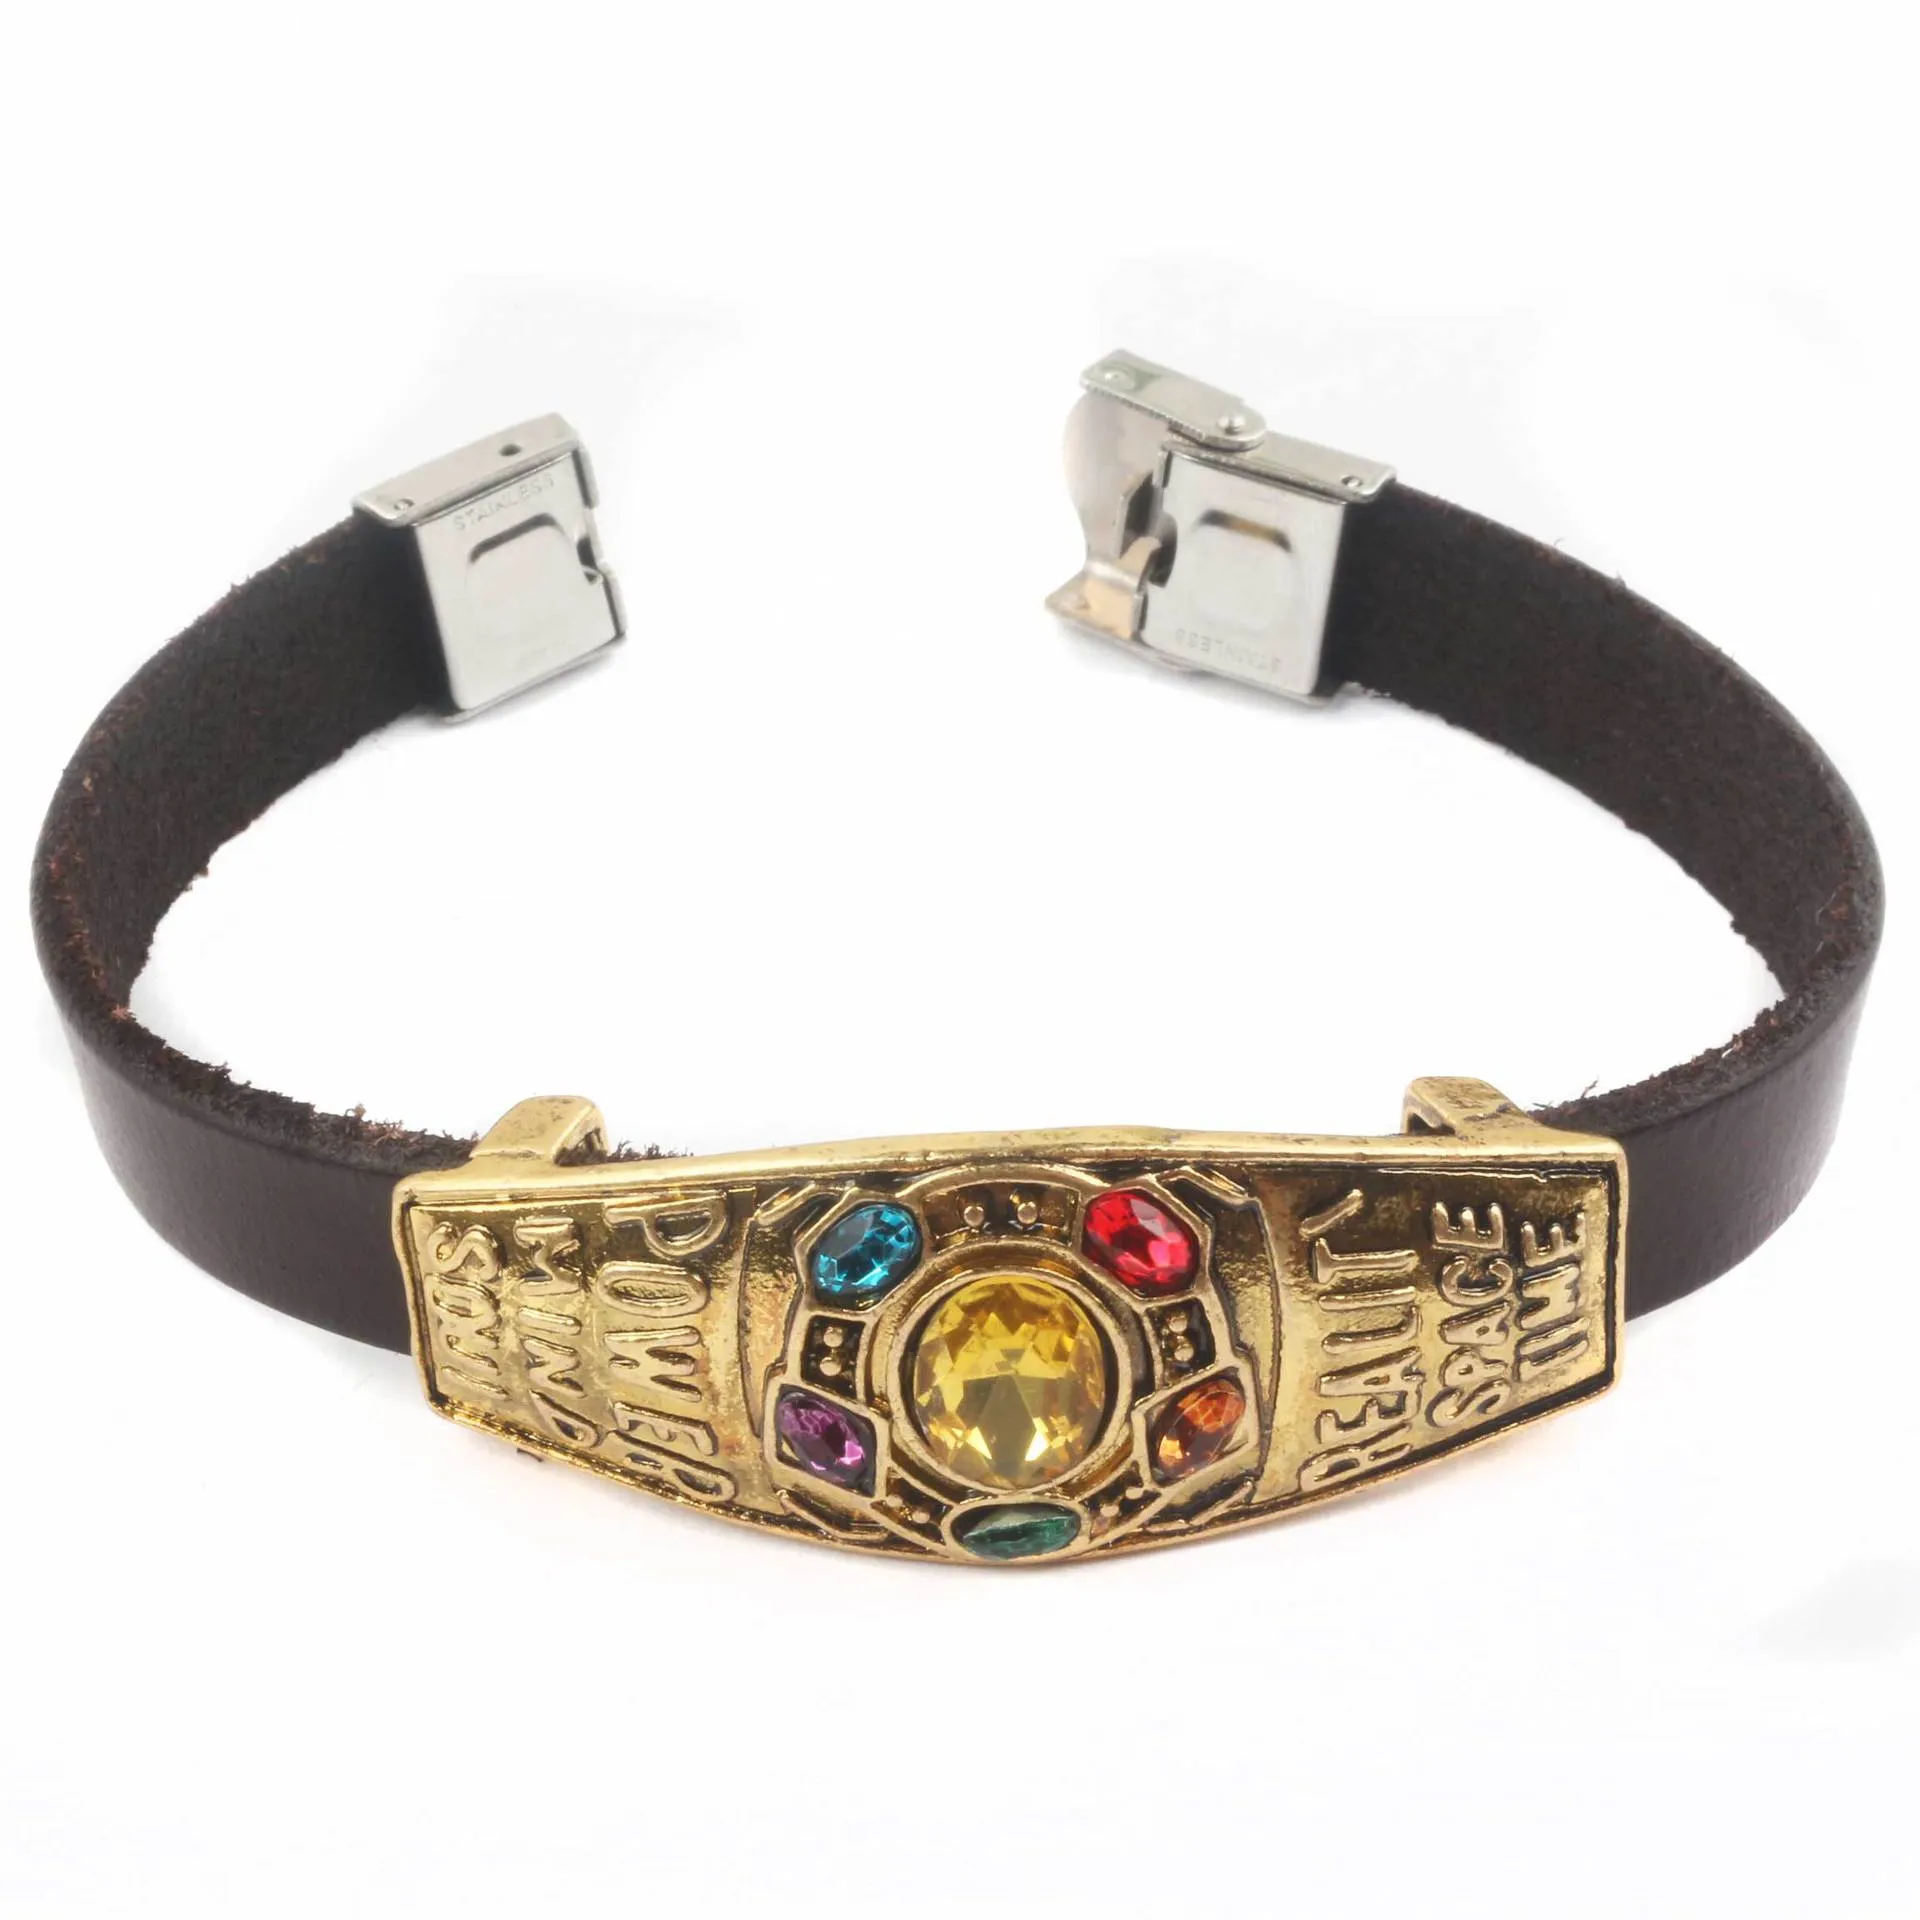 PHOTOS: New Marvel Avengers, Iron Man, and Captain America Bracelets by  Alex and Ani Save the Day at Walt Disney World - WDW News Today